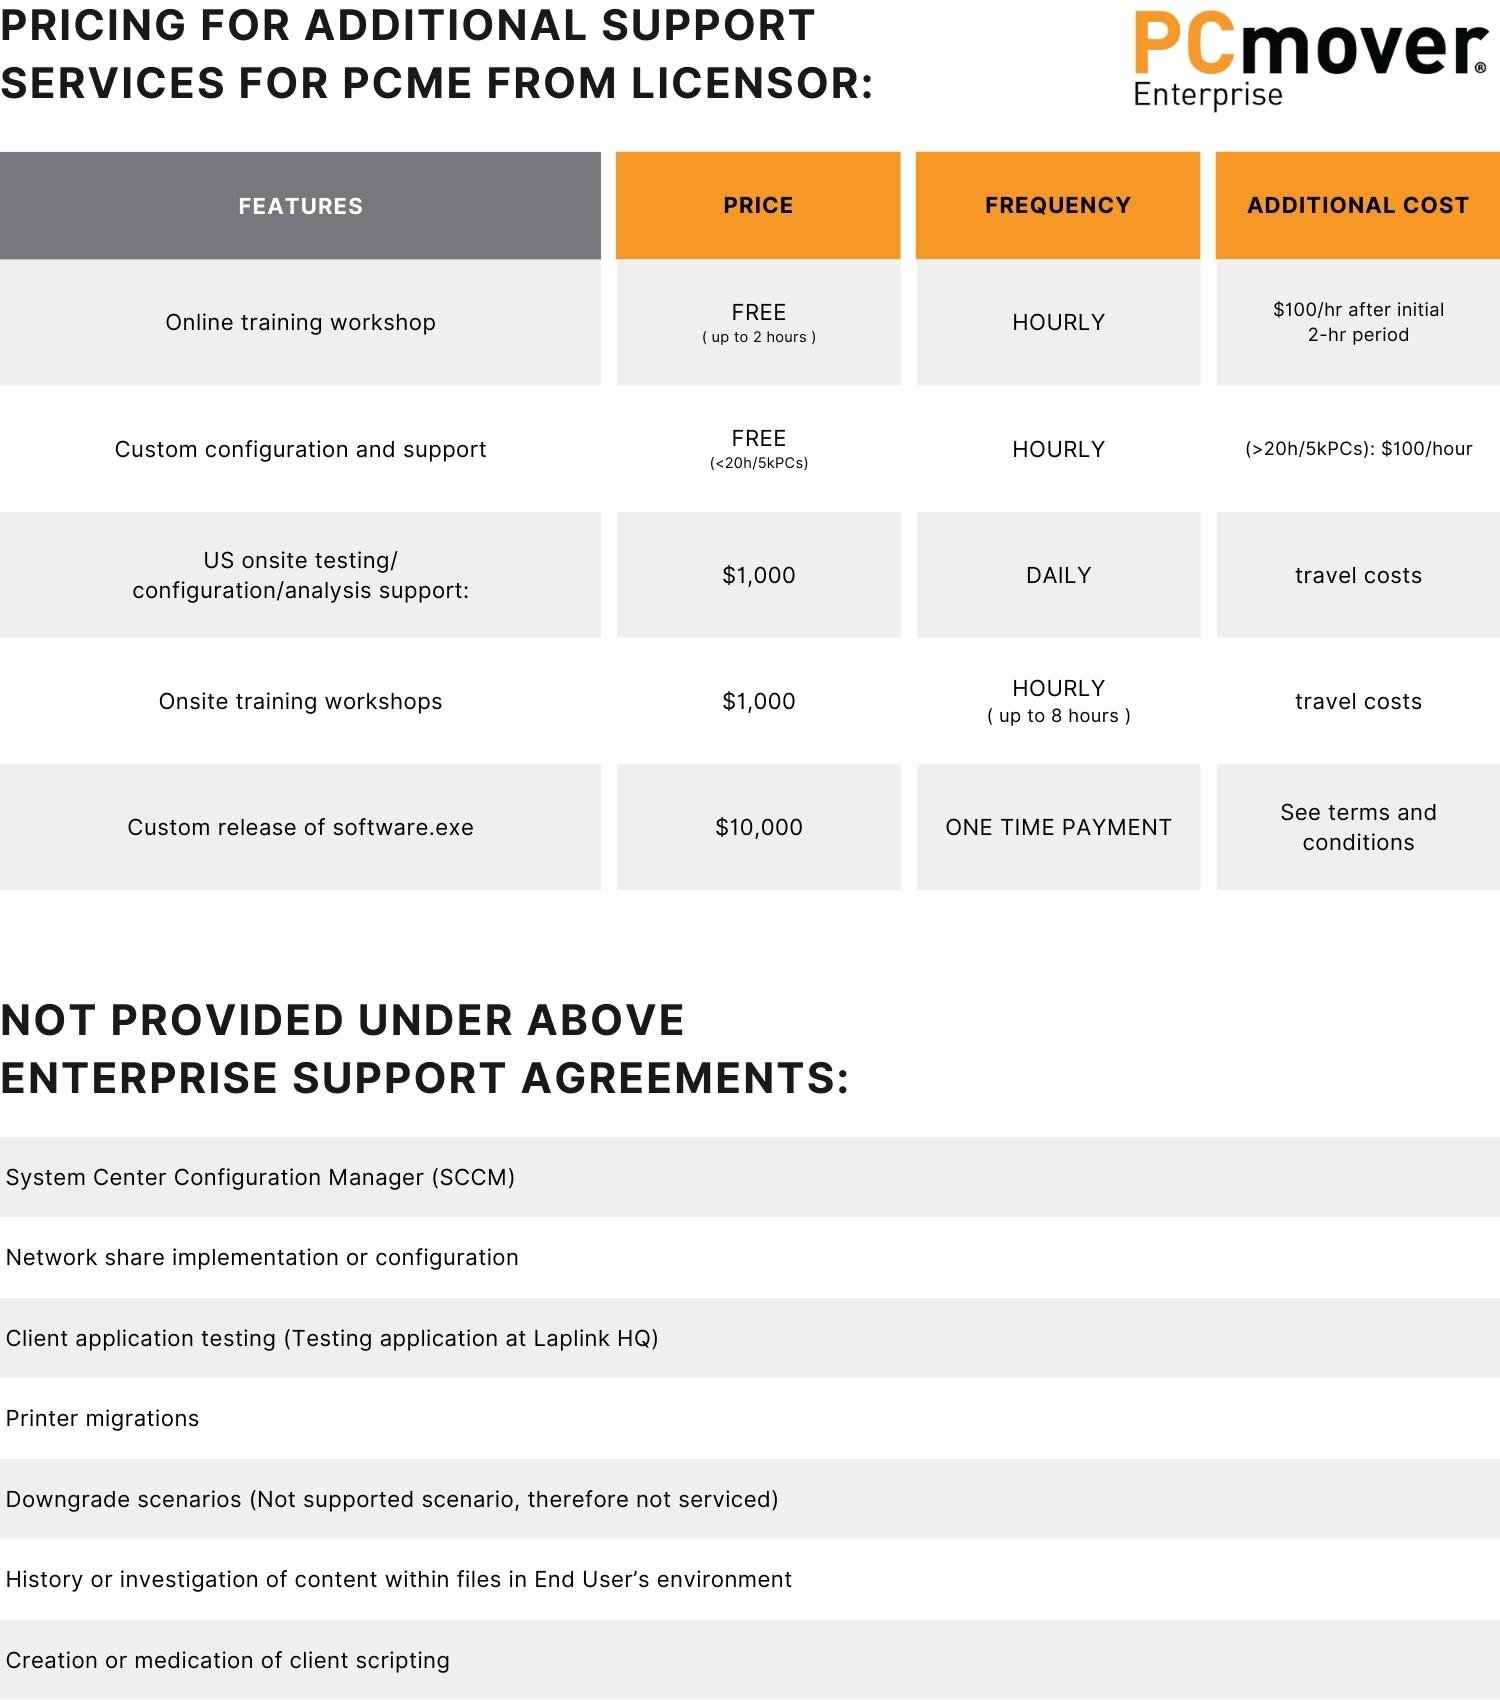 case study-PCmover Enterprise support services table (1)